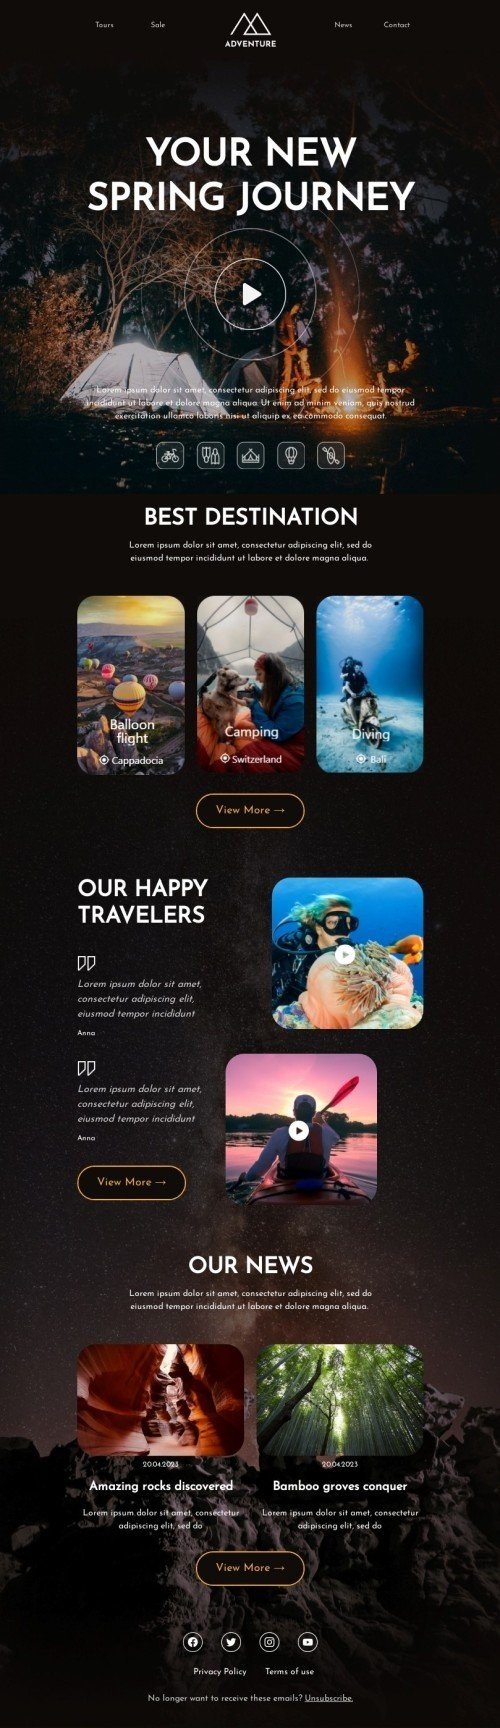 Spring email template "Spring journey" for travel industry mobile view